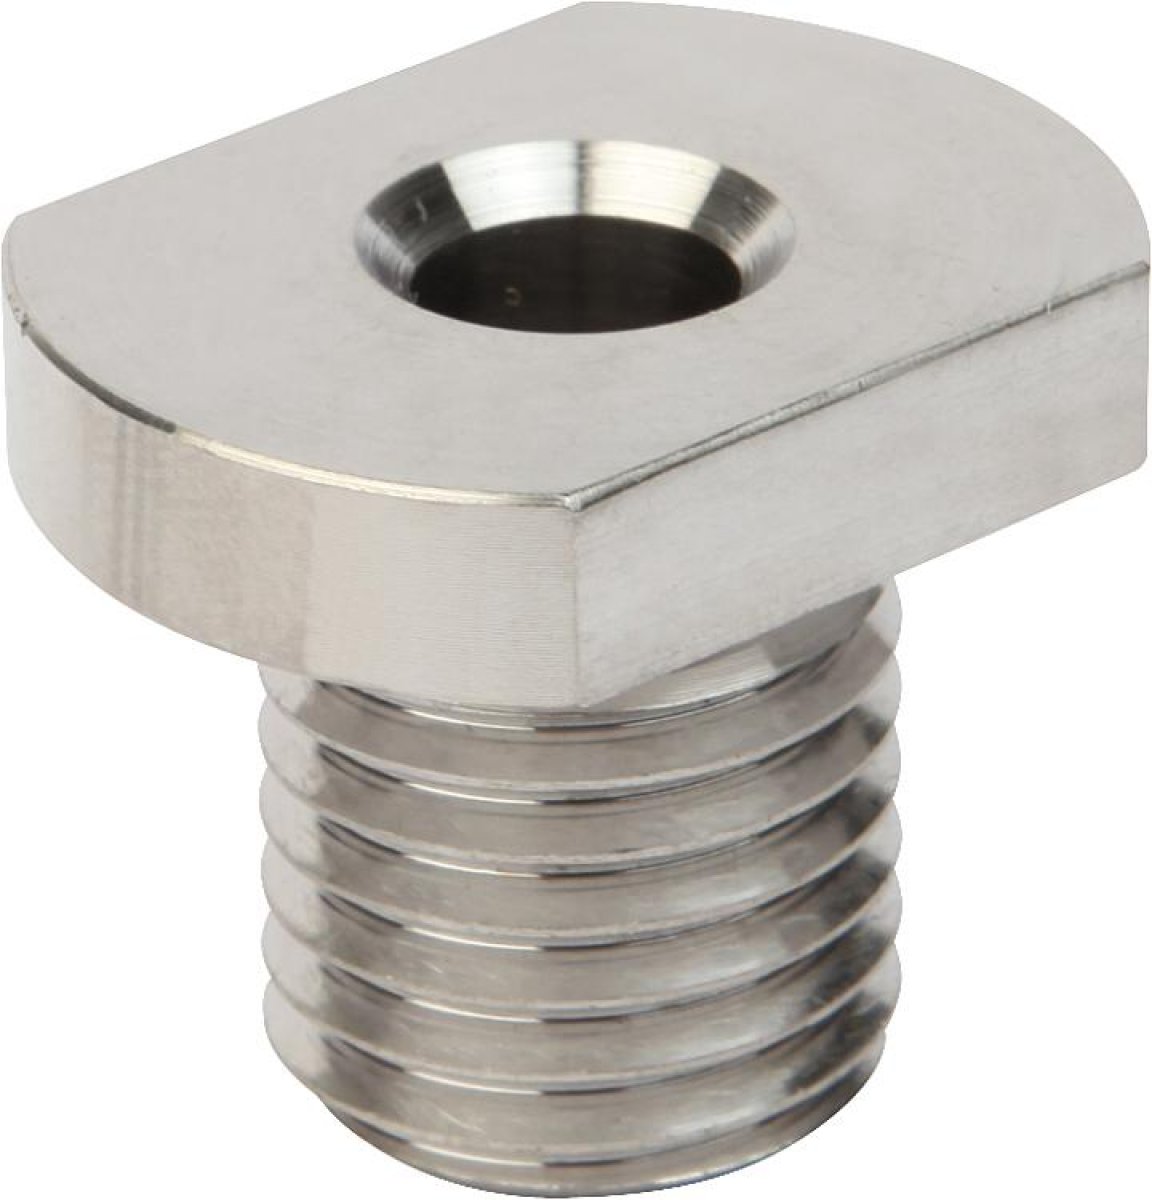 Receiver bush stainless steel, for lifting pins